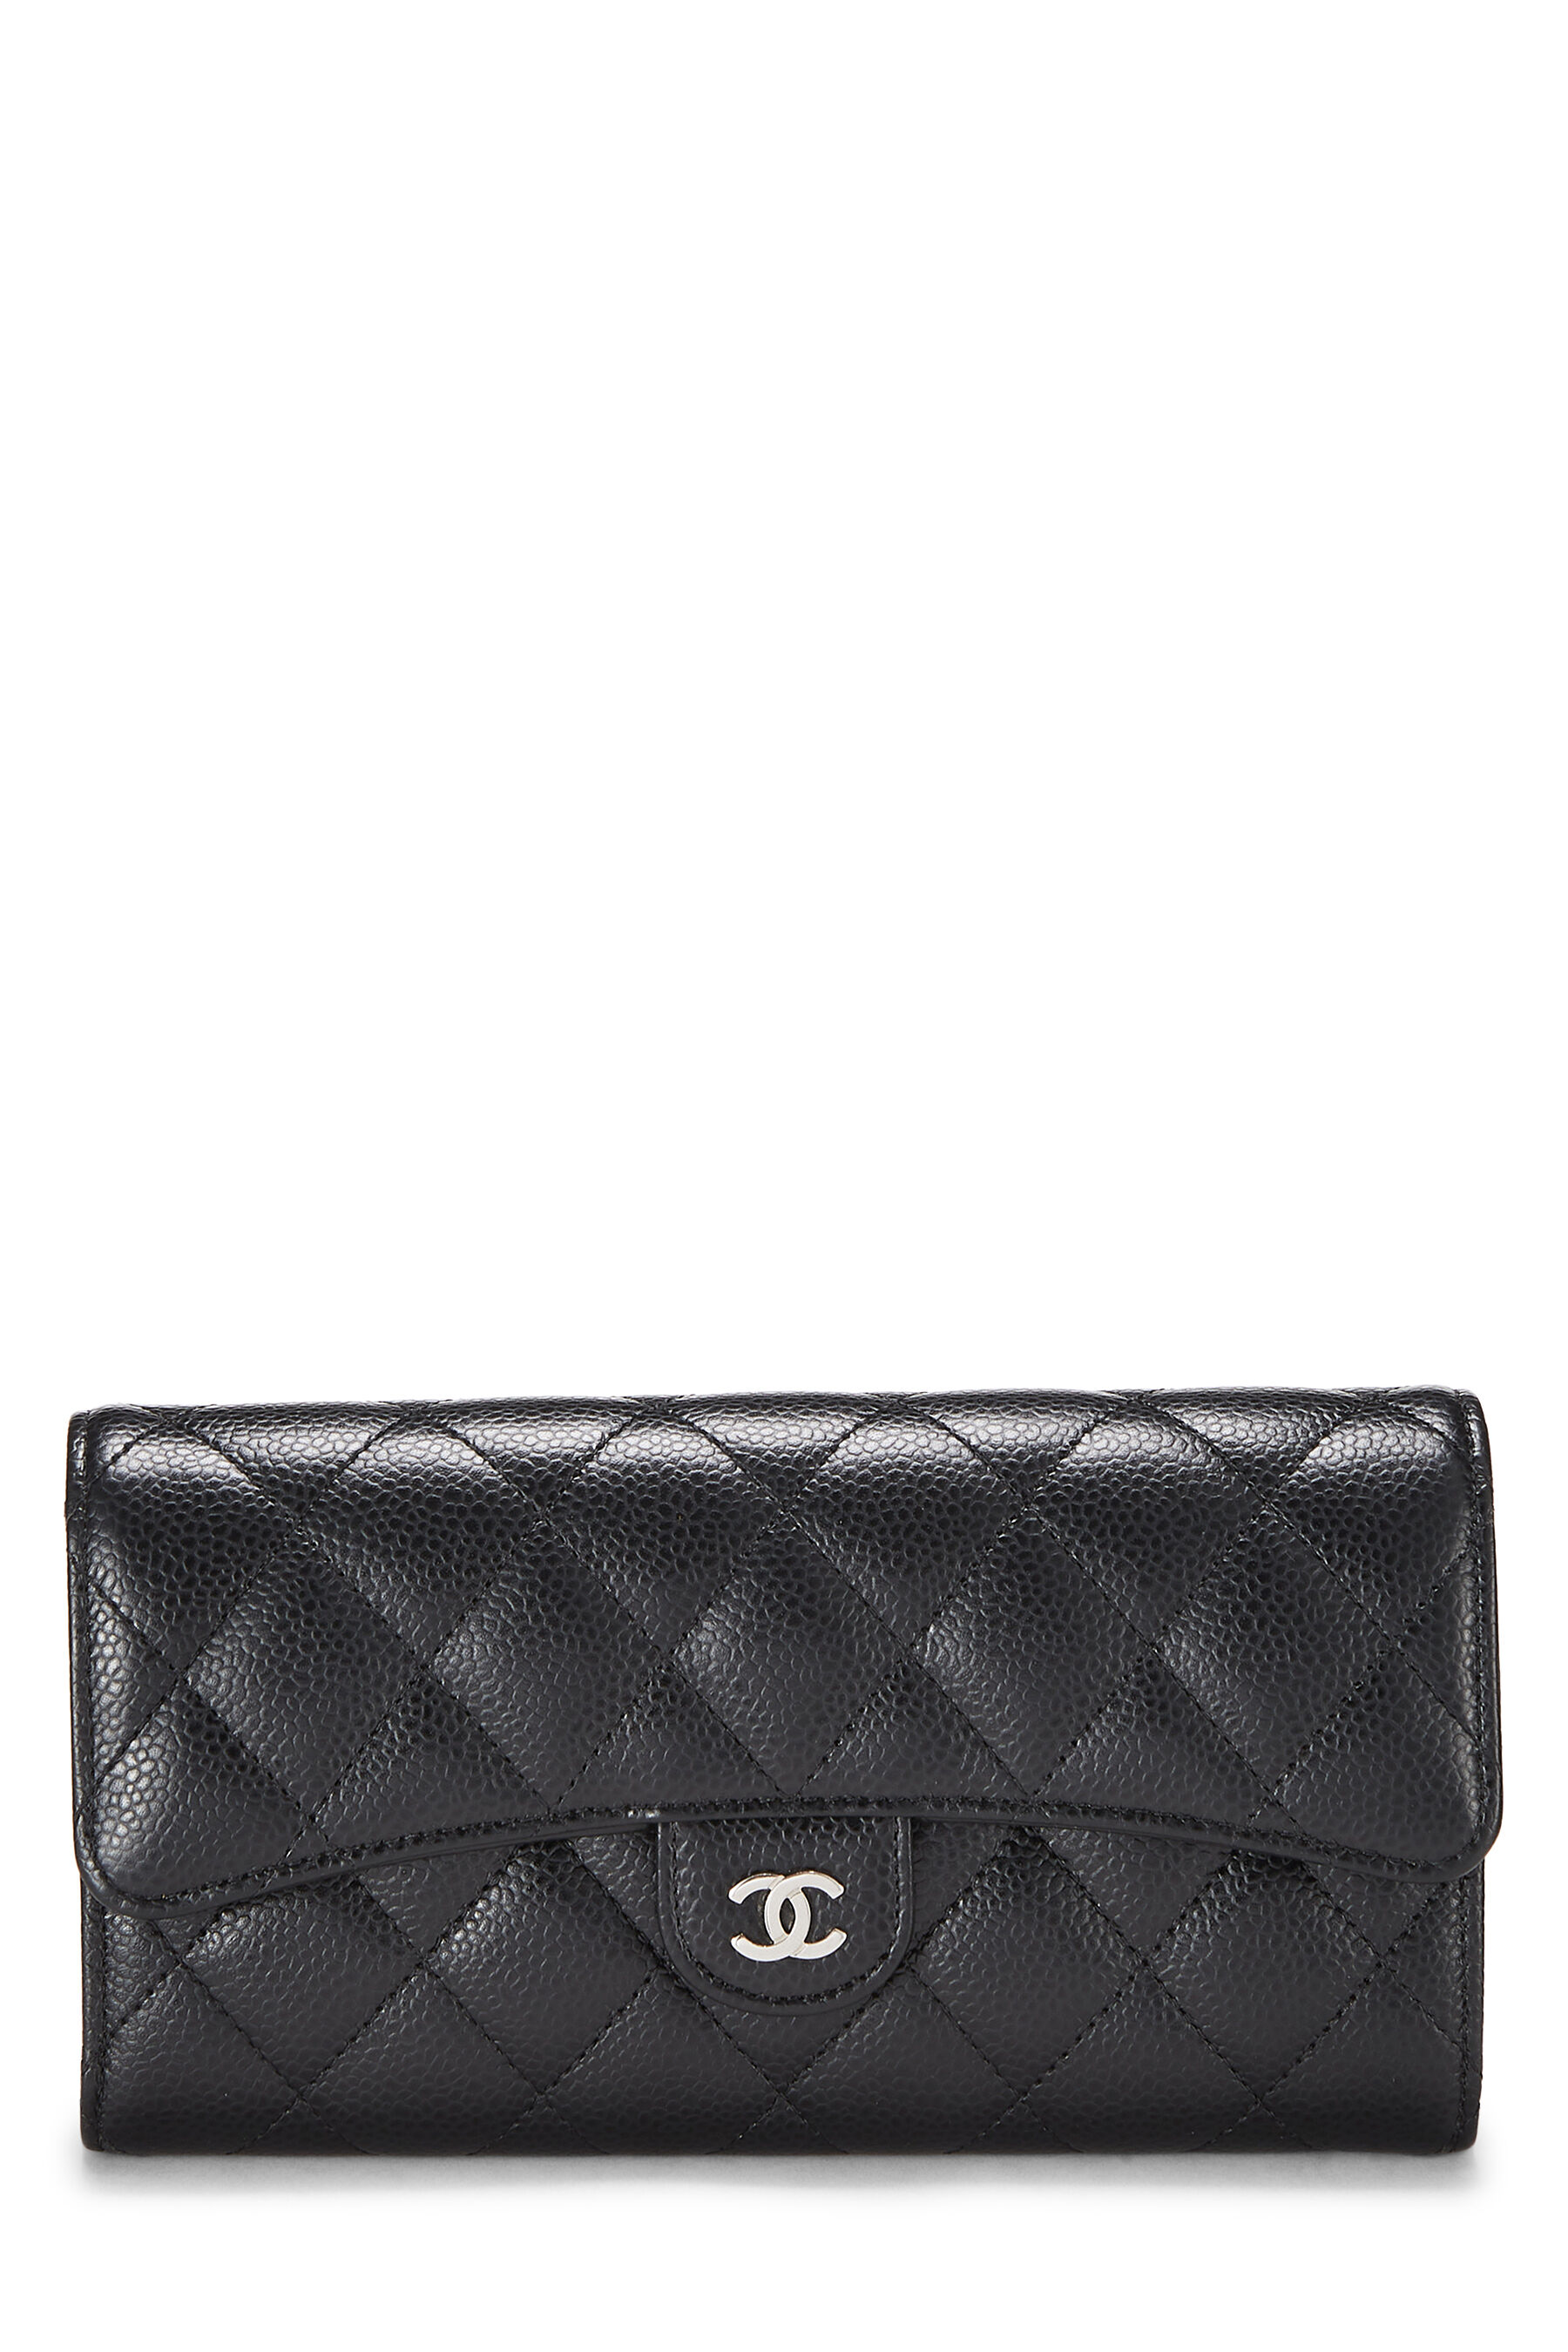 Caviar Quilted Long Flap Wallet With Top Zipper Black GHW